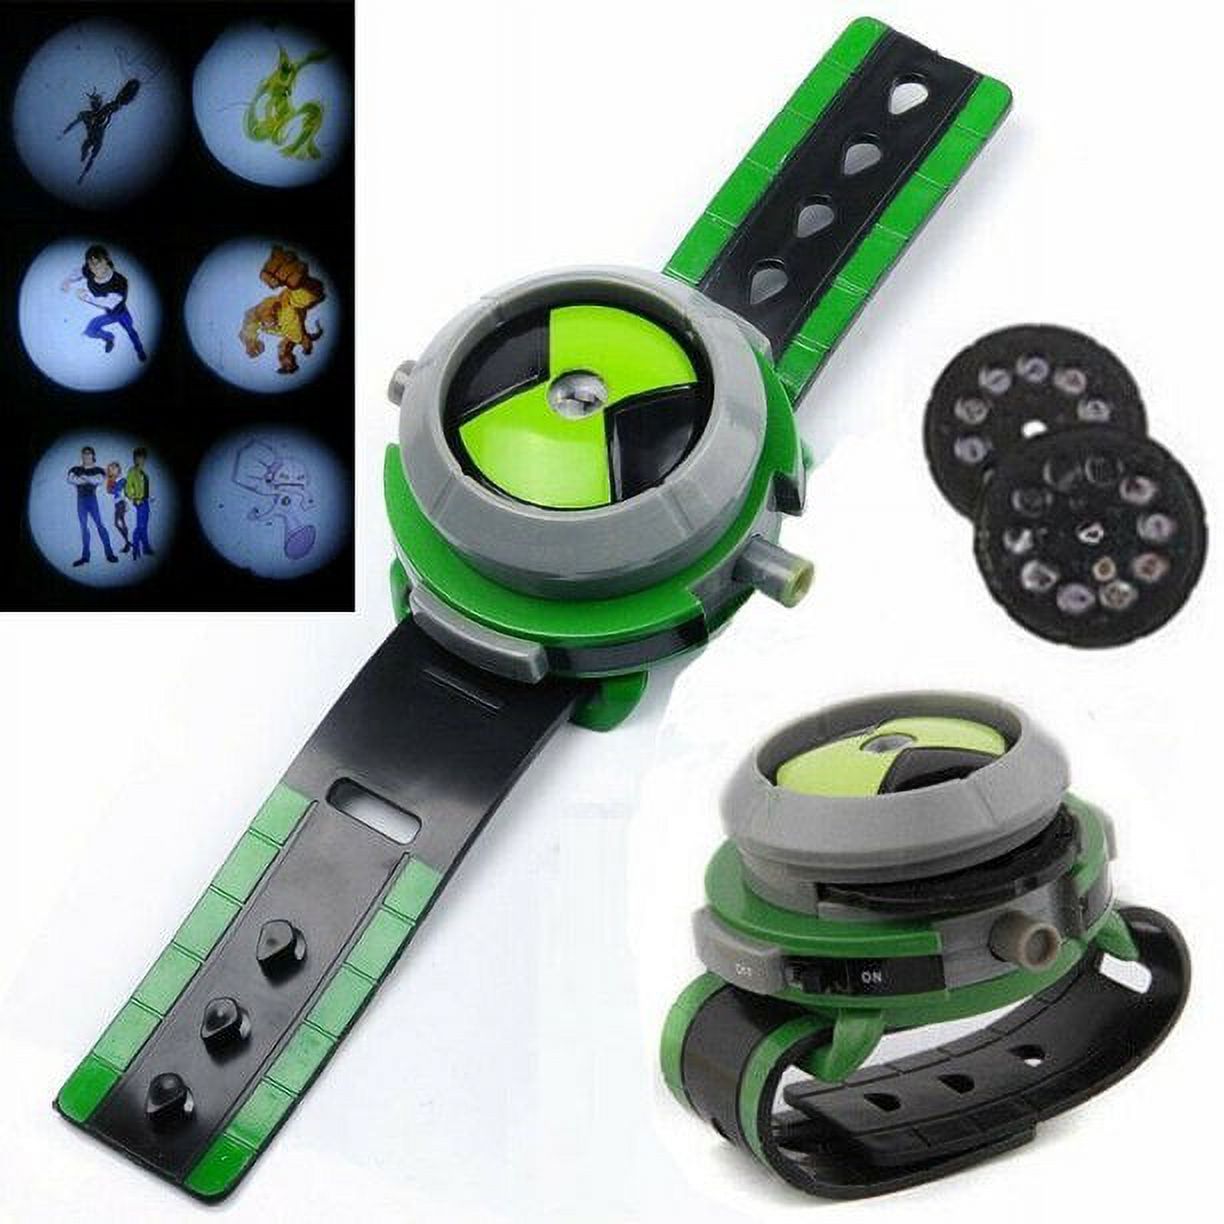 1 pcs Ben 10 Alien Force Omnitrix Illumintator Projector Watch Toy Gift for Child Kids - image 1 of 5